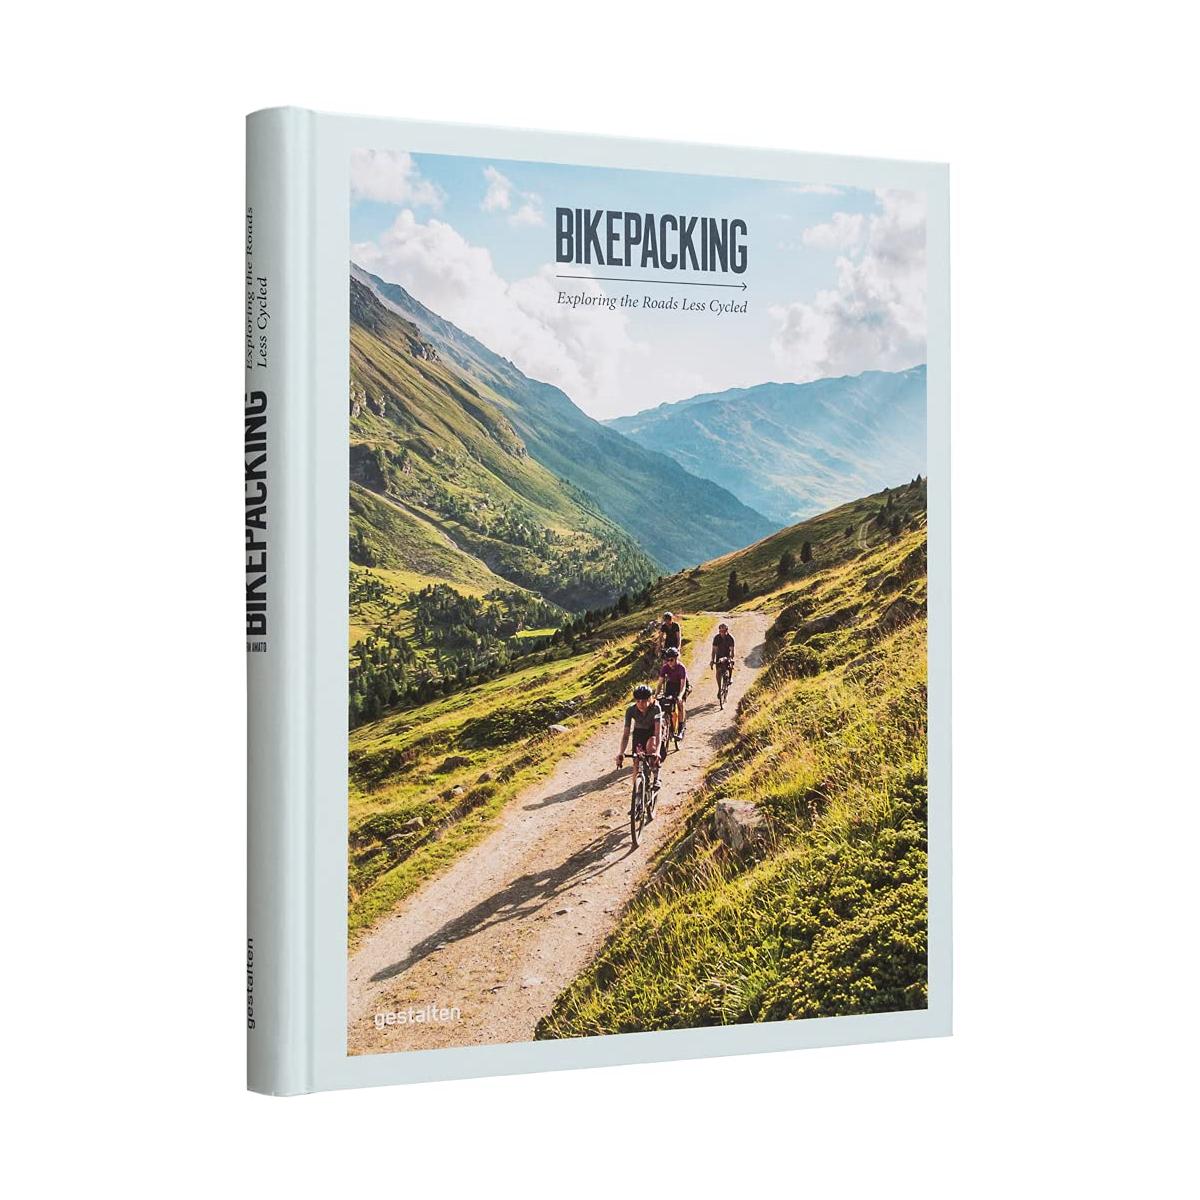 Bikepacking: Exploring the Roads Less Cycled